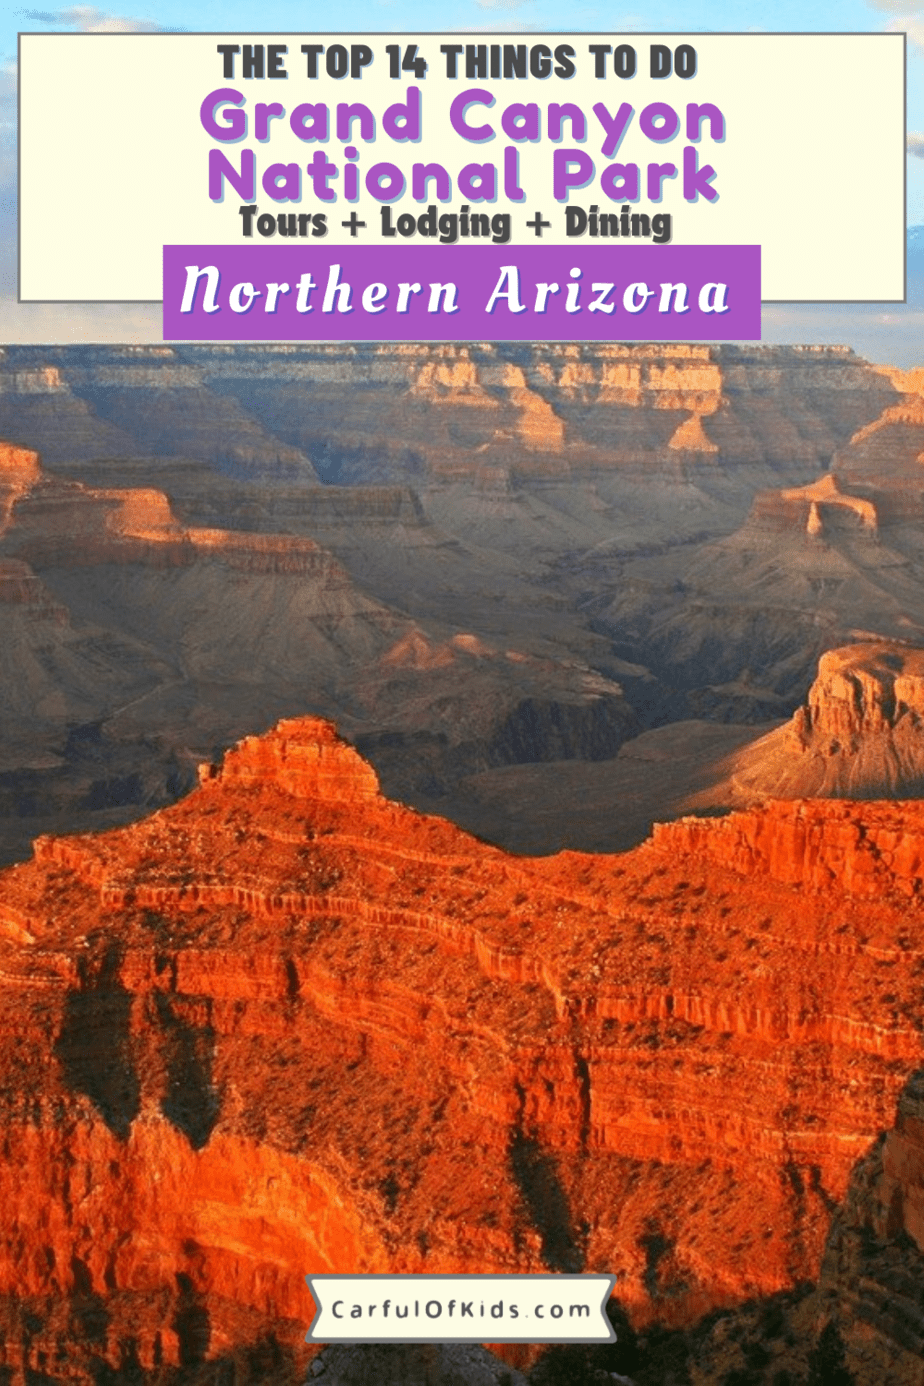 If it's your first trip to the Grand Canyon, here's a planning guide on what to see at the Grand Canyon, where to eat at the Grand Canyon and where to stay at the South Rim of the Grand Canyon. Find out where to camp and picnic spots too. Explore the Grand Canyon's South Rim in a few hours or a few days. #NationalParks #GrandCanyon #Arizona